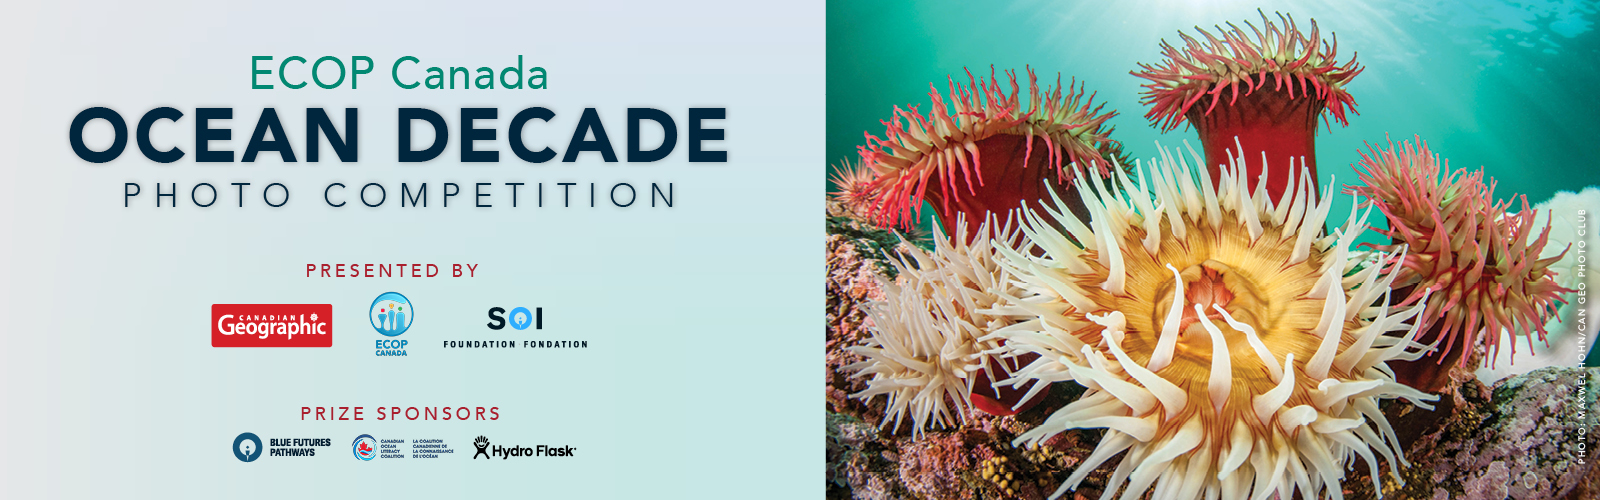 Underwater photo of colourful anemones on hard substrate next to the text ‘ECOP Canada Ocean Decade photo competition’, presented by Canadian Geographic, ECOP Canada, Sustainable Ocean Alliance, and sponsored by Blue Futures Pathways, the Canadian Ocean Literacy Coalition, and Hydro Flask.